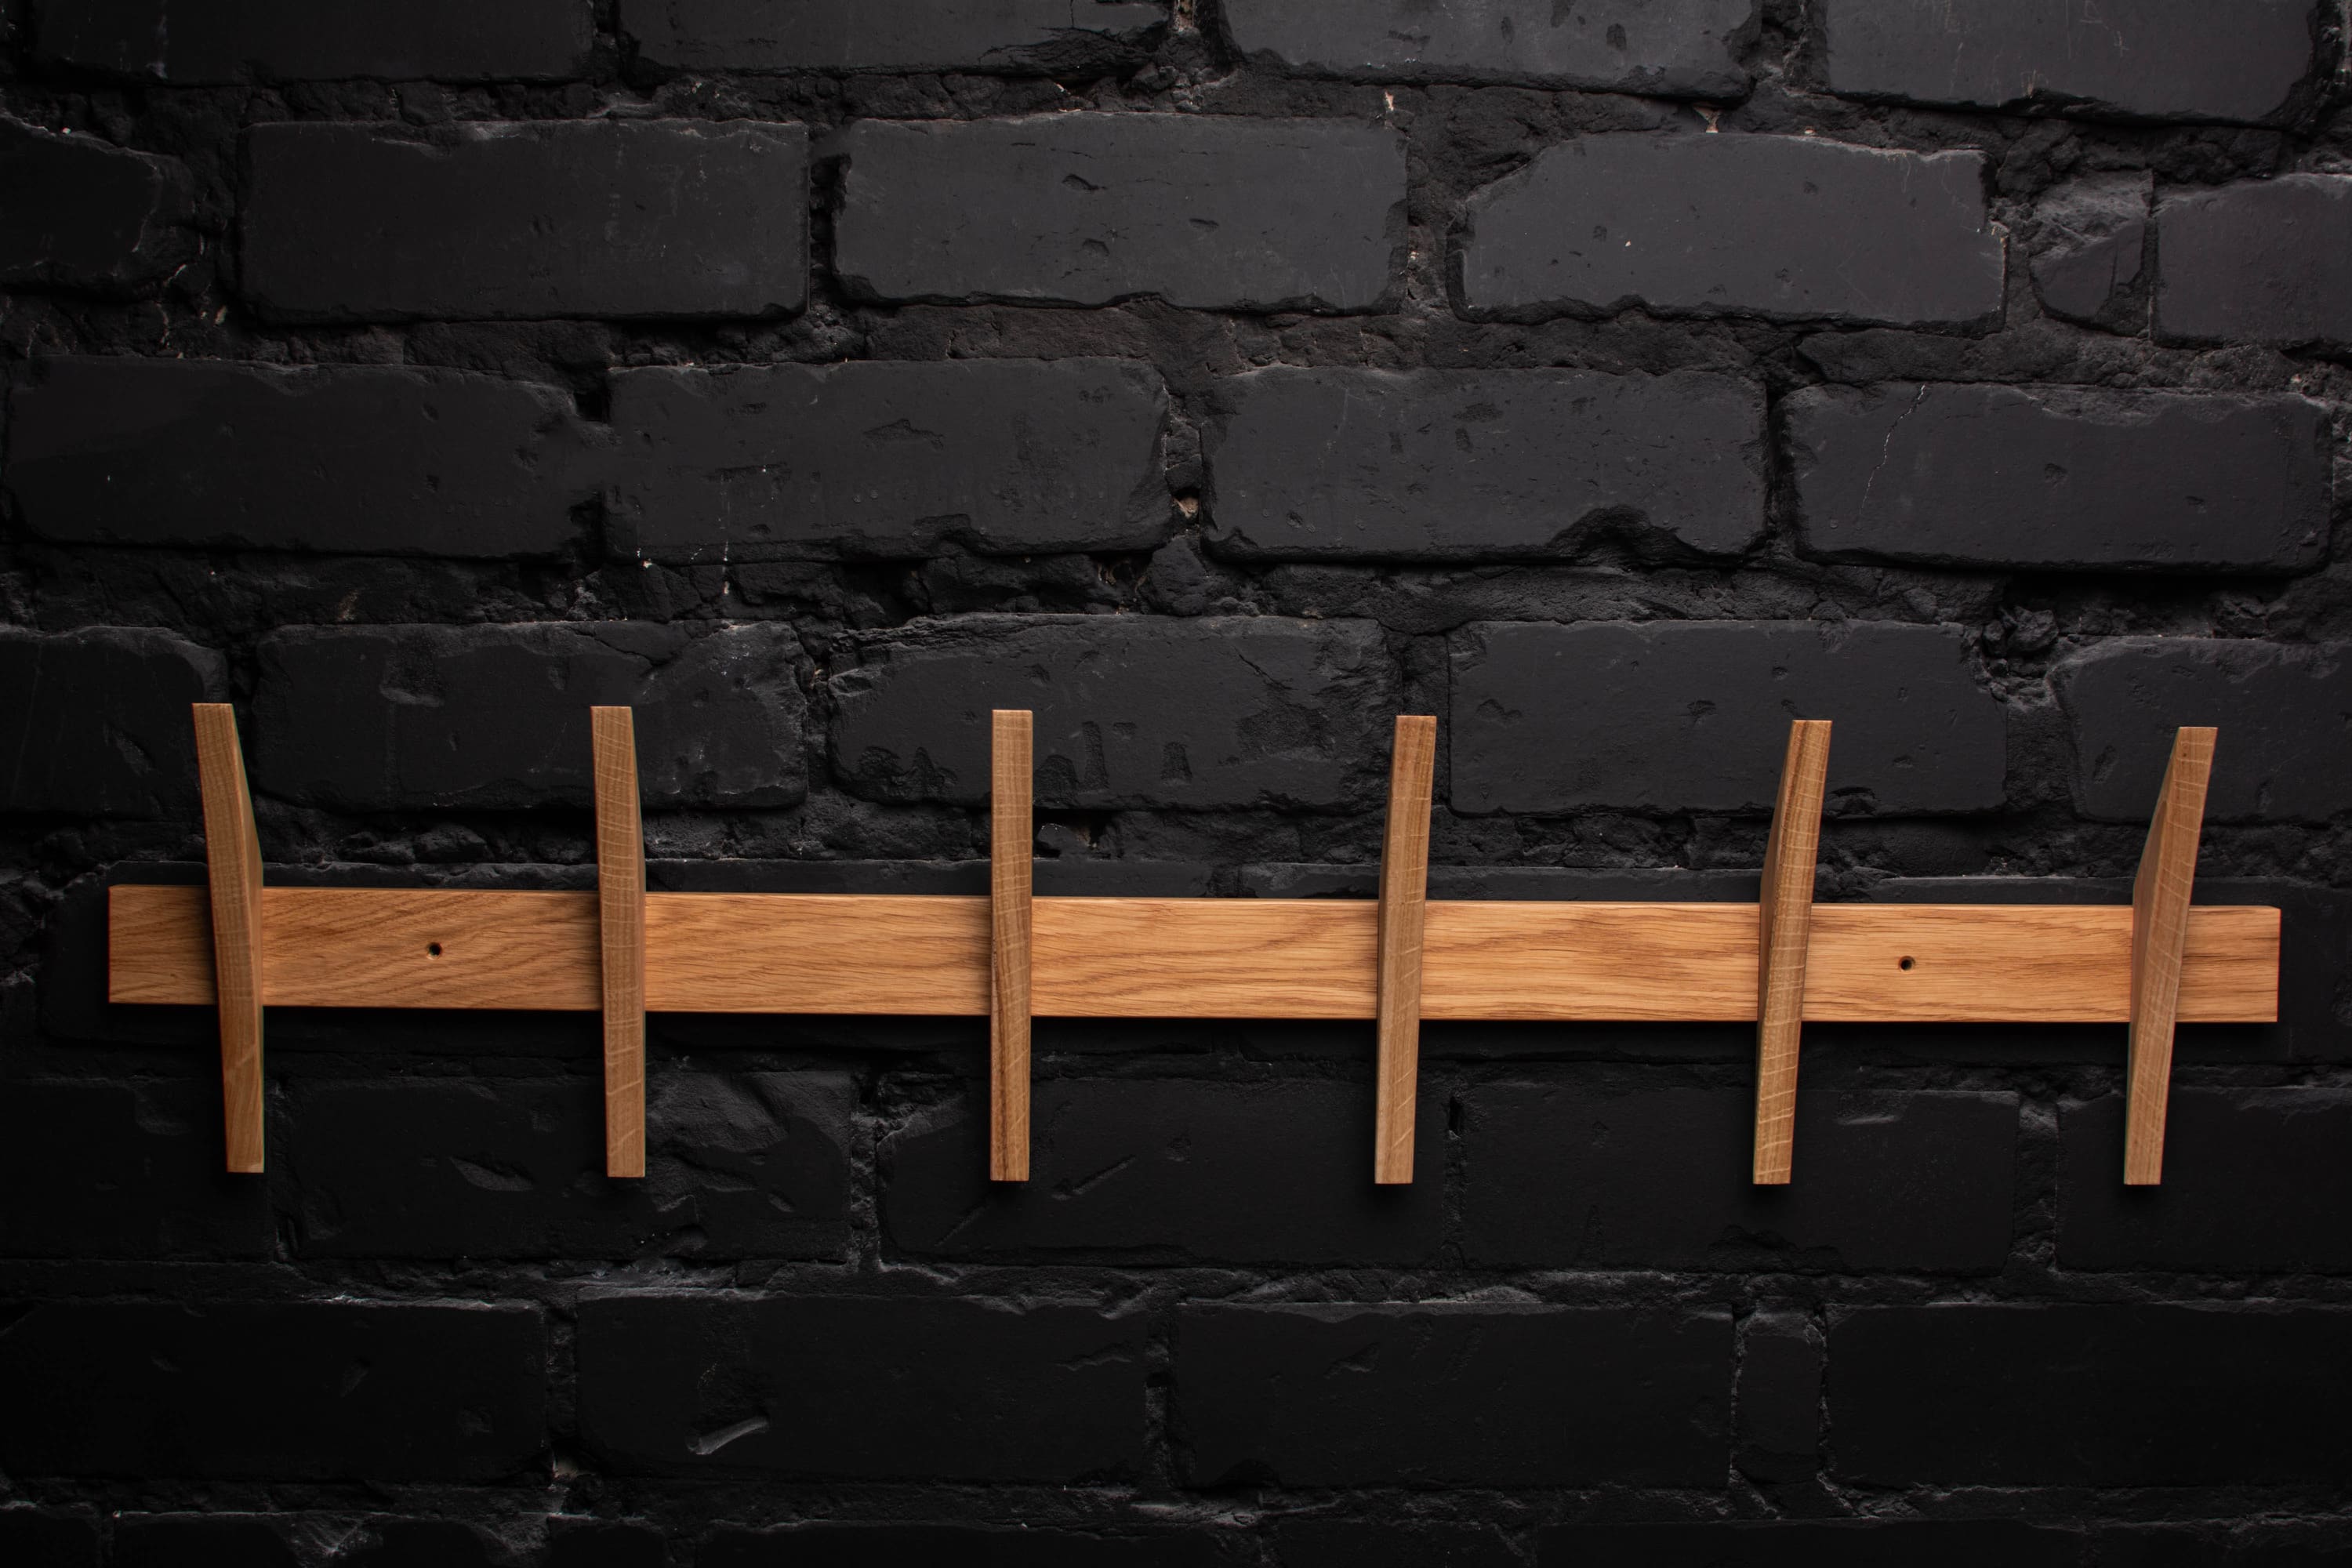 Oak Wall-Mounted Rack with Hooks - Minimalist and Sophisticated Design